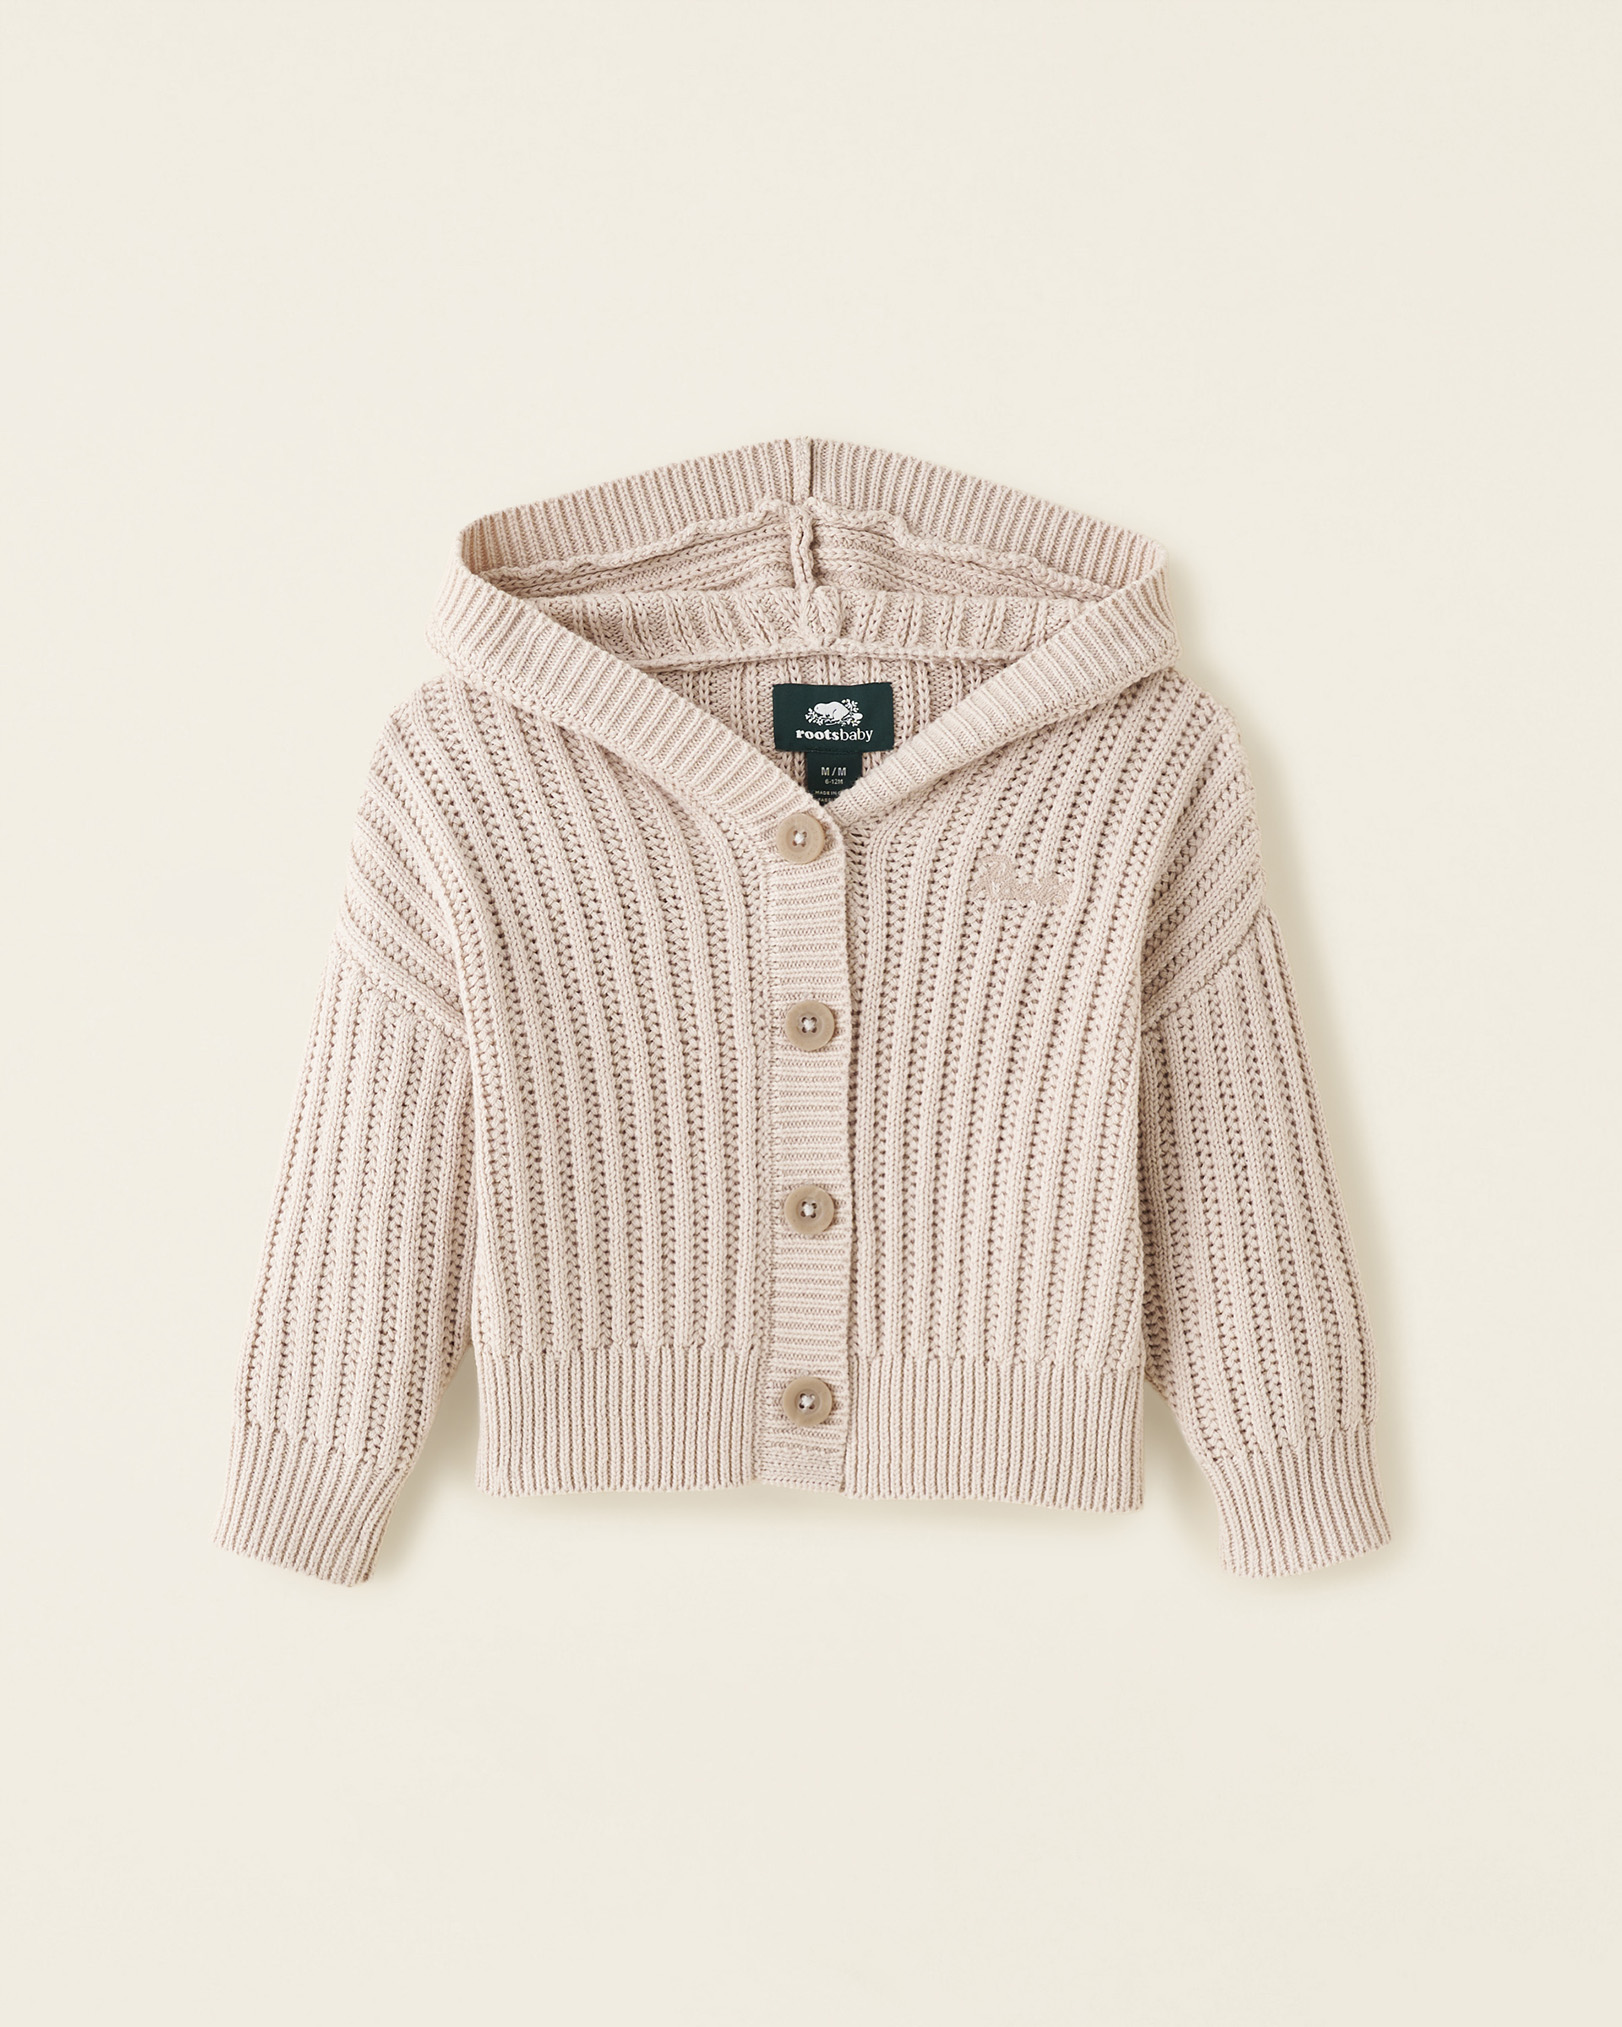 Roots Baby Bear Cardigan in Sandstone